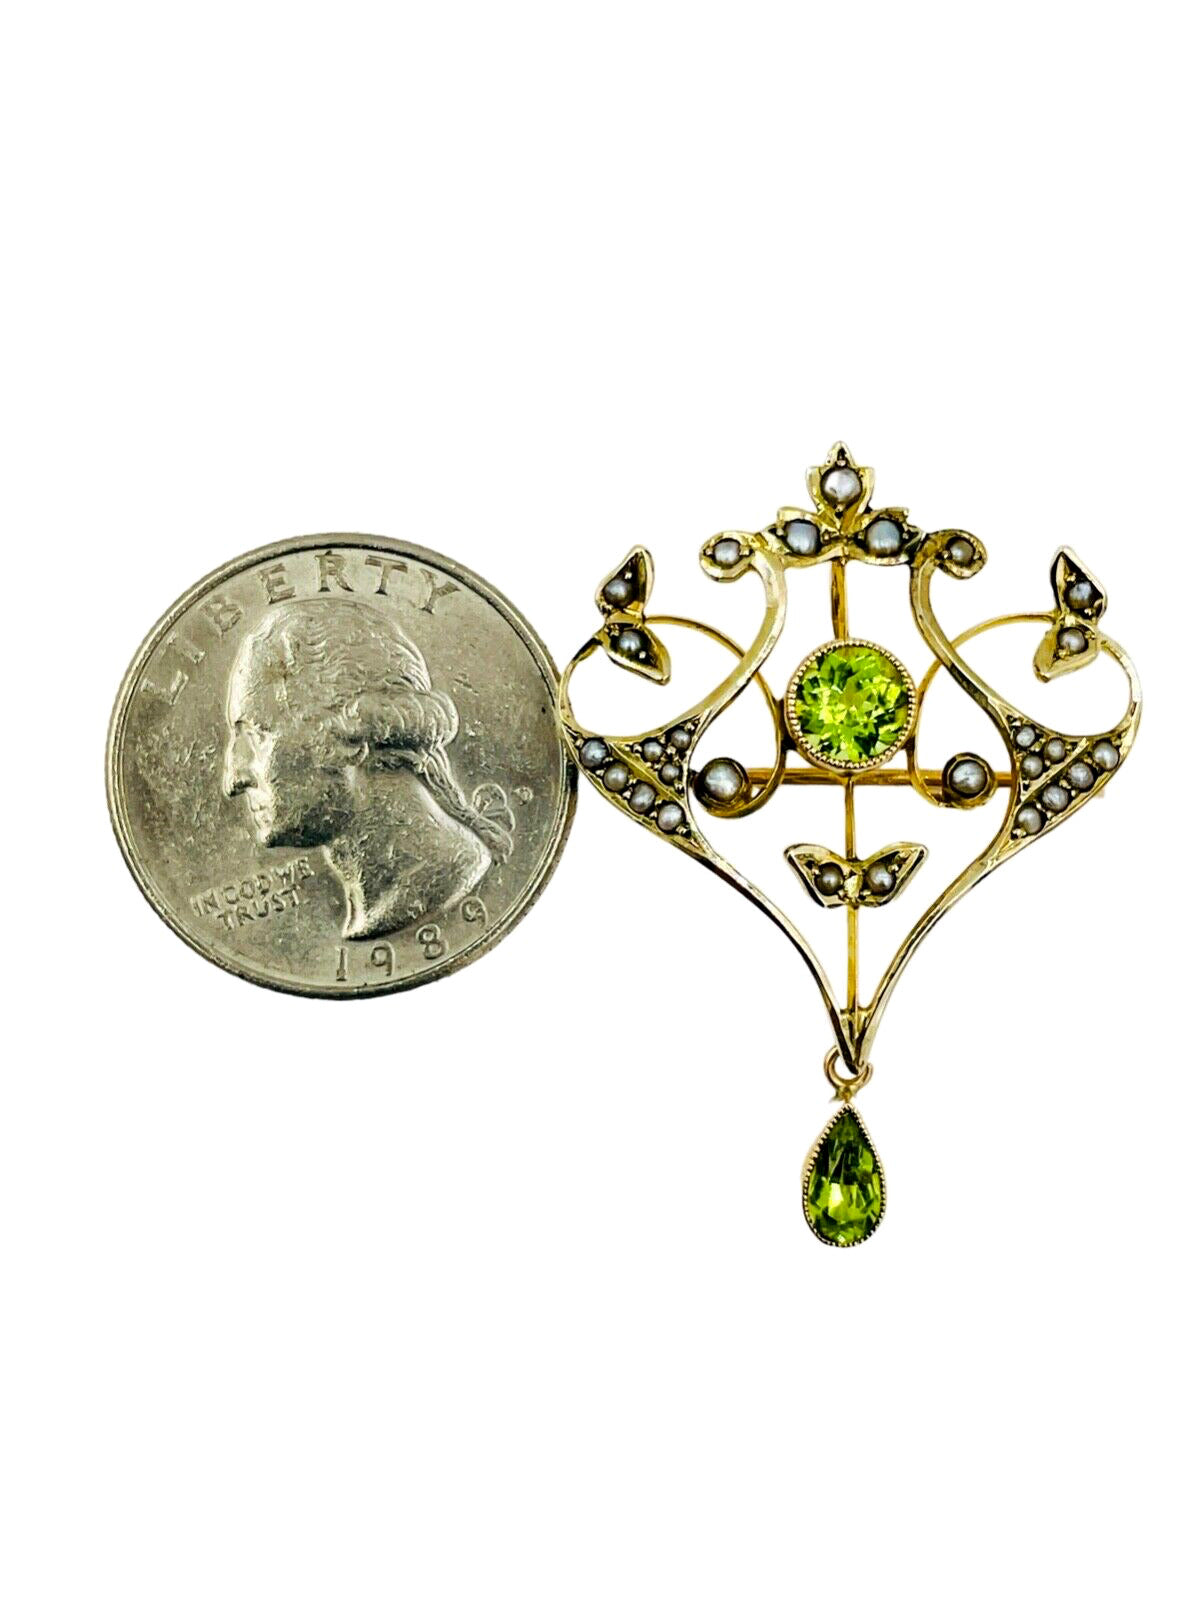 Antique Brooch Pin Pearls and Peridot 9ct Art Nouveau 9k